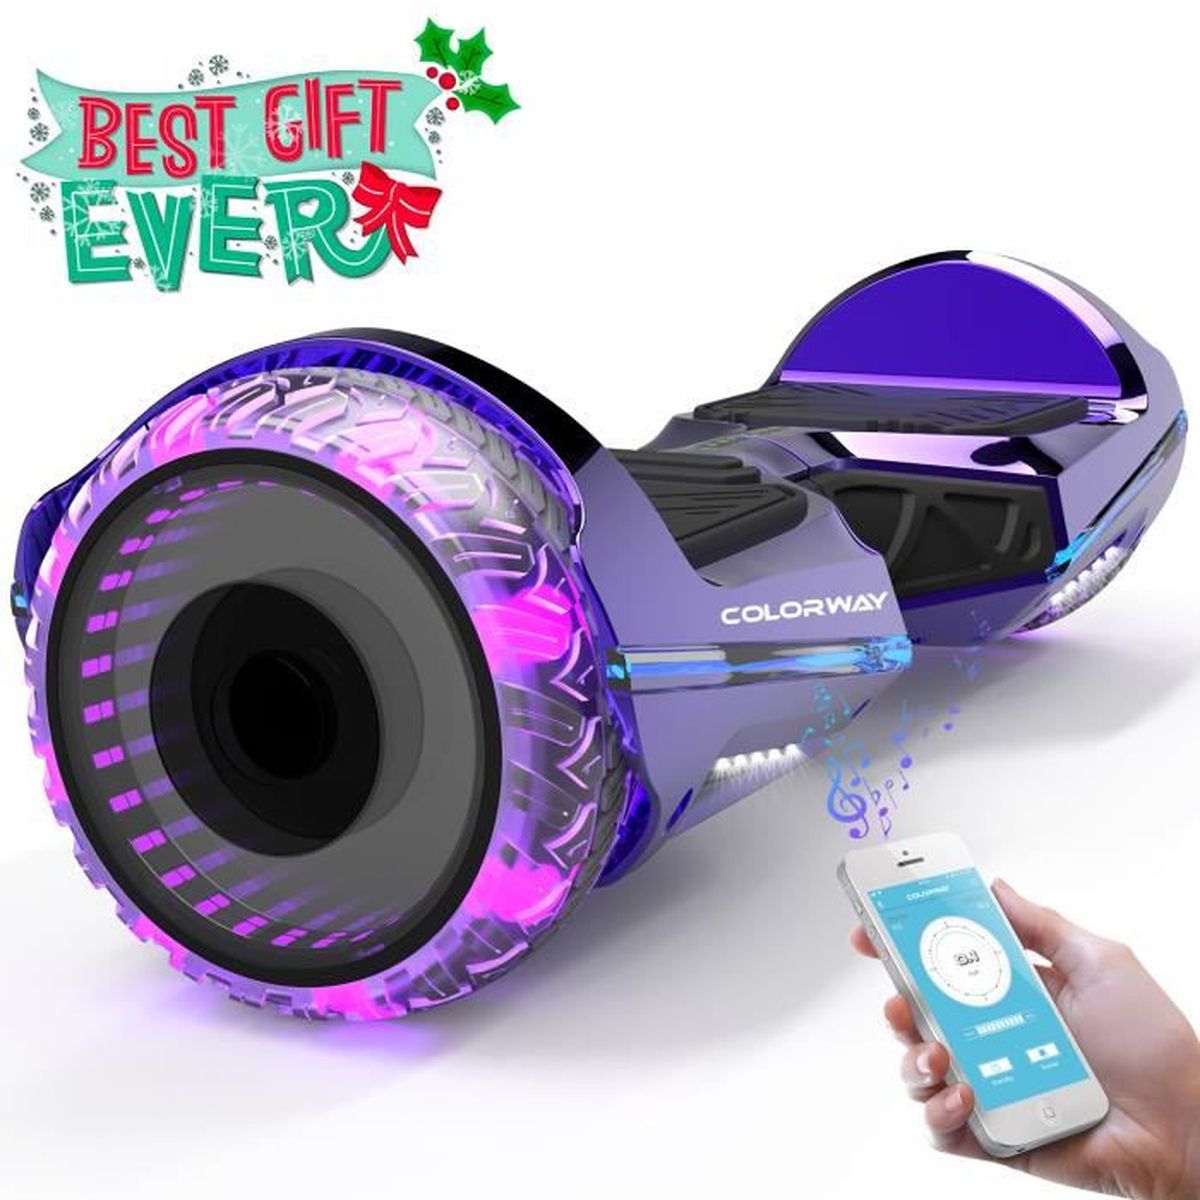 Self-Balance Board avec Roues LED Flash Hoverkart COLORWAY Overboard Hover Scooter Board Gyropode Bluetooth SUV 6.5 Pouces Scooter Electrique Moteur 700W Tout-Terrain 